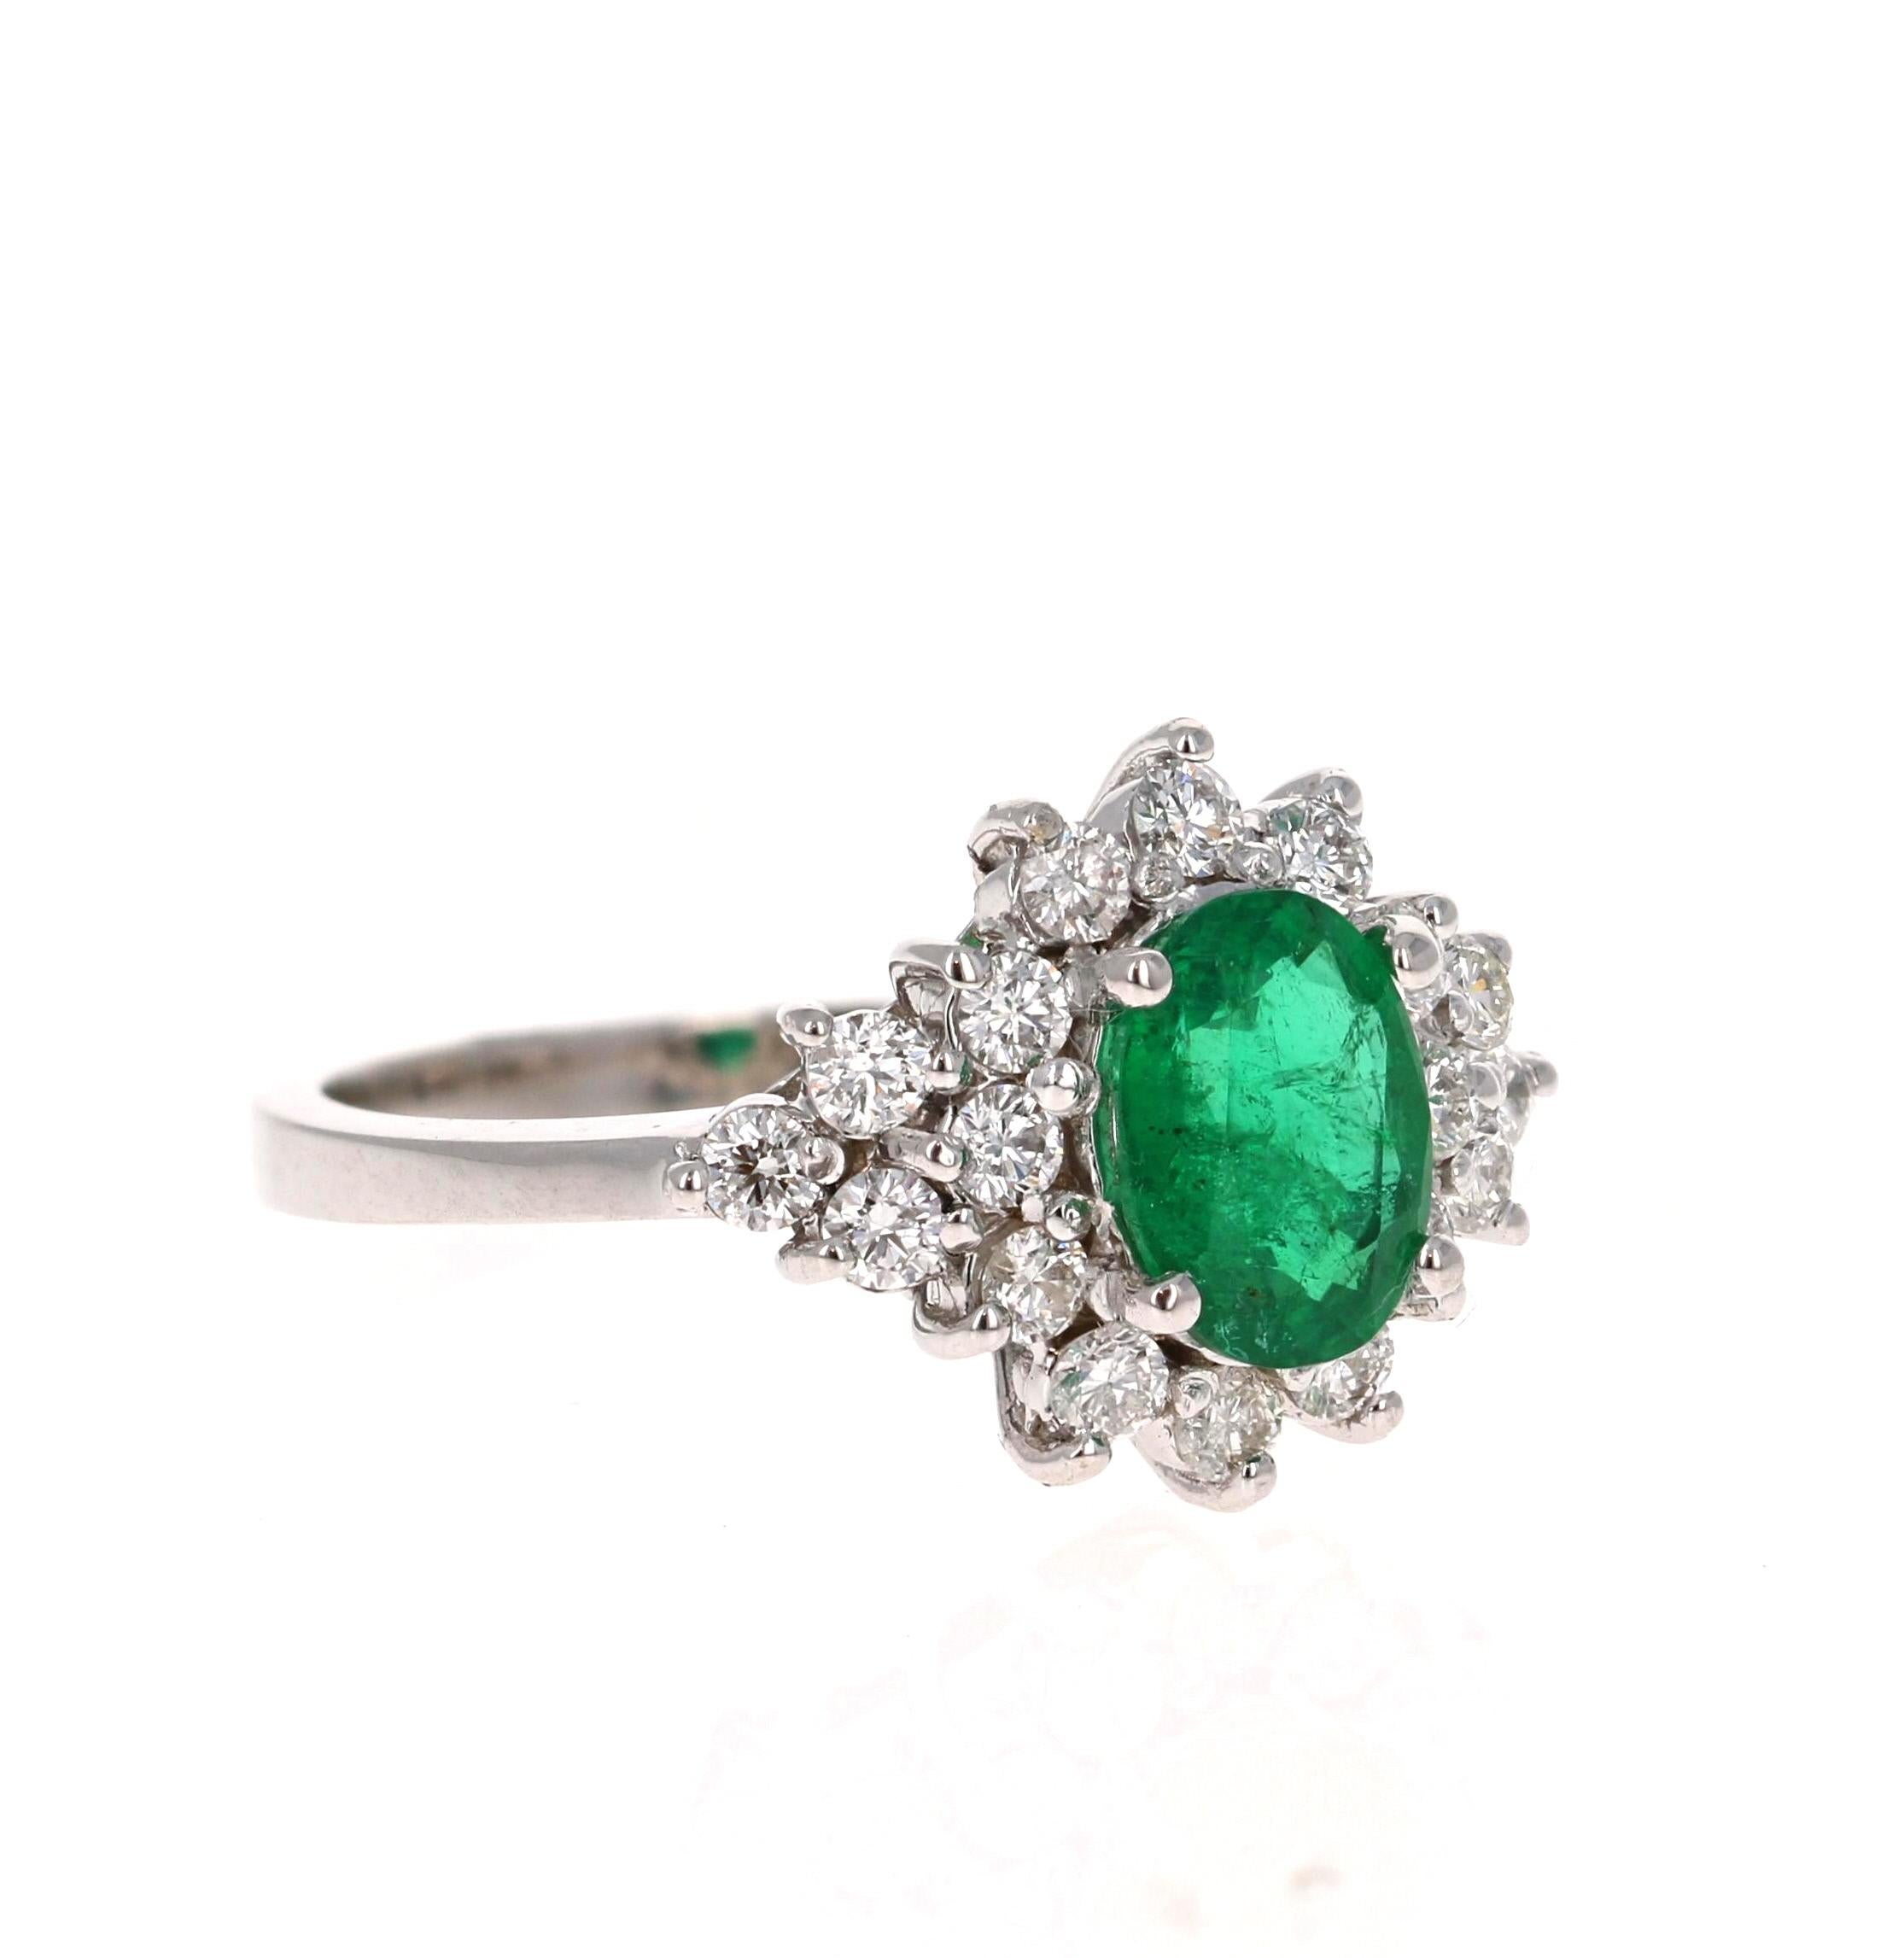 A beautiful 1.73 Carat Emerald and Diamond Ring in 18K White Gold.
This gorgeous ring has a 1.14 Carat Oval Cut Emerald that is set in the center of the ring!  The Emerald is surrounded by 18 Round Cut Diamonds that weigh 0.59 Carats. The Clarity is